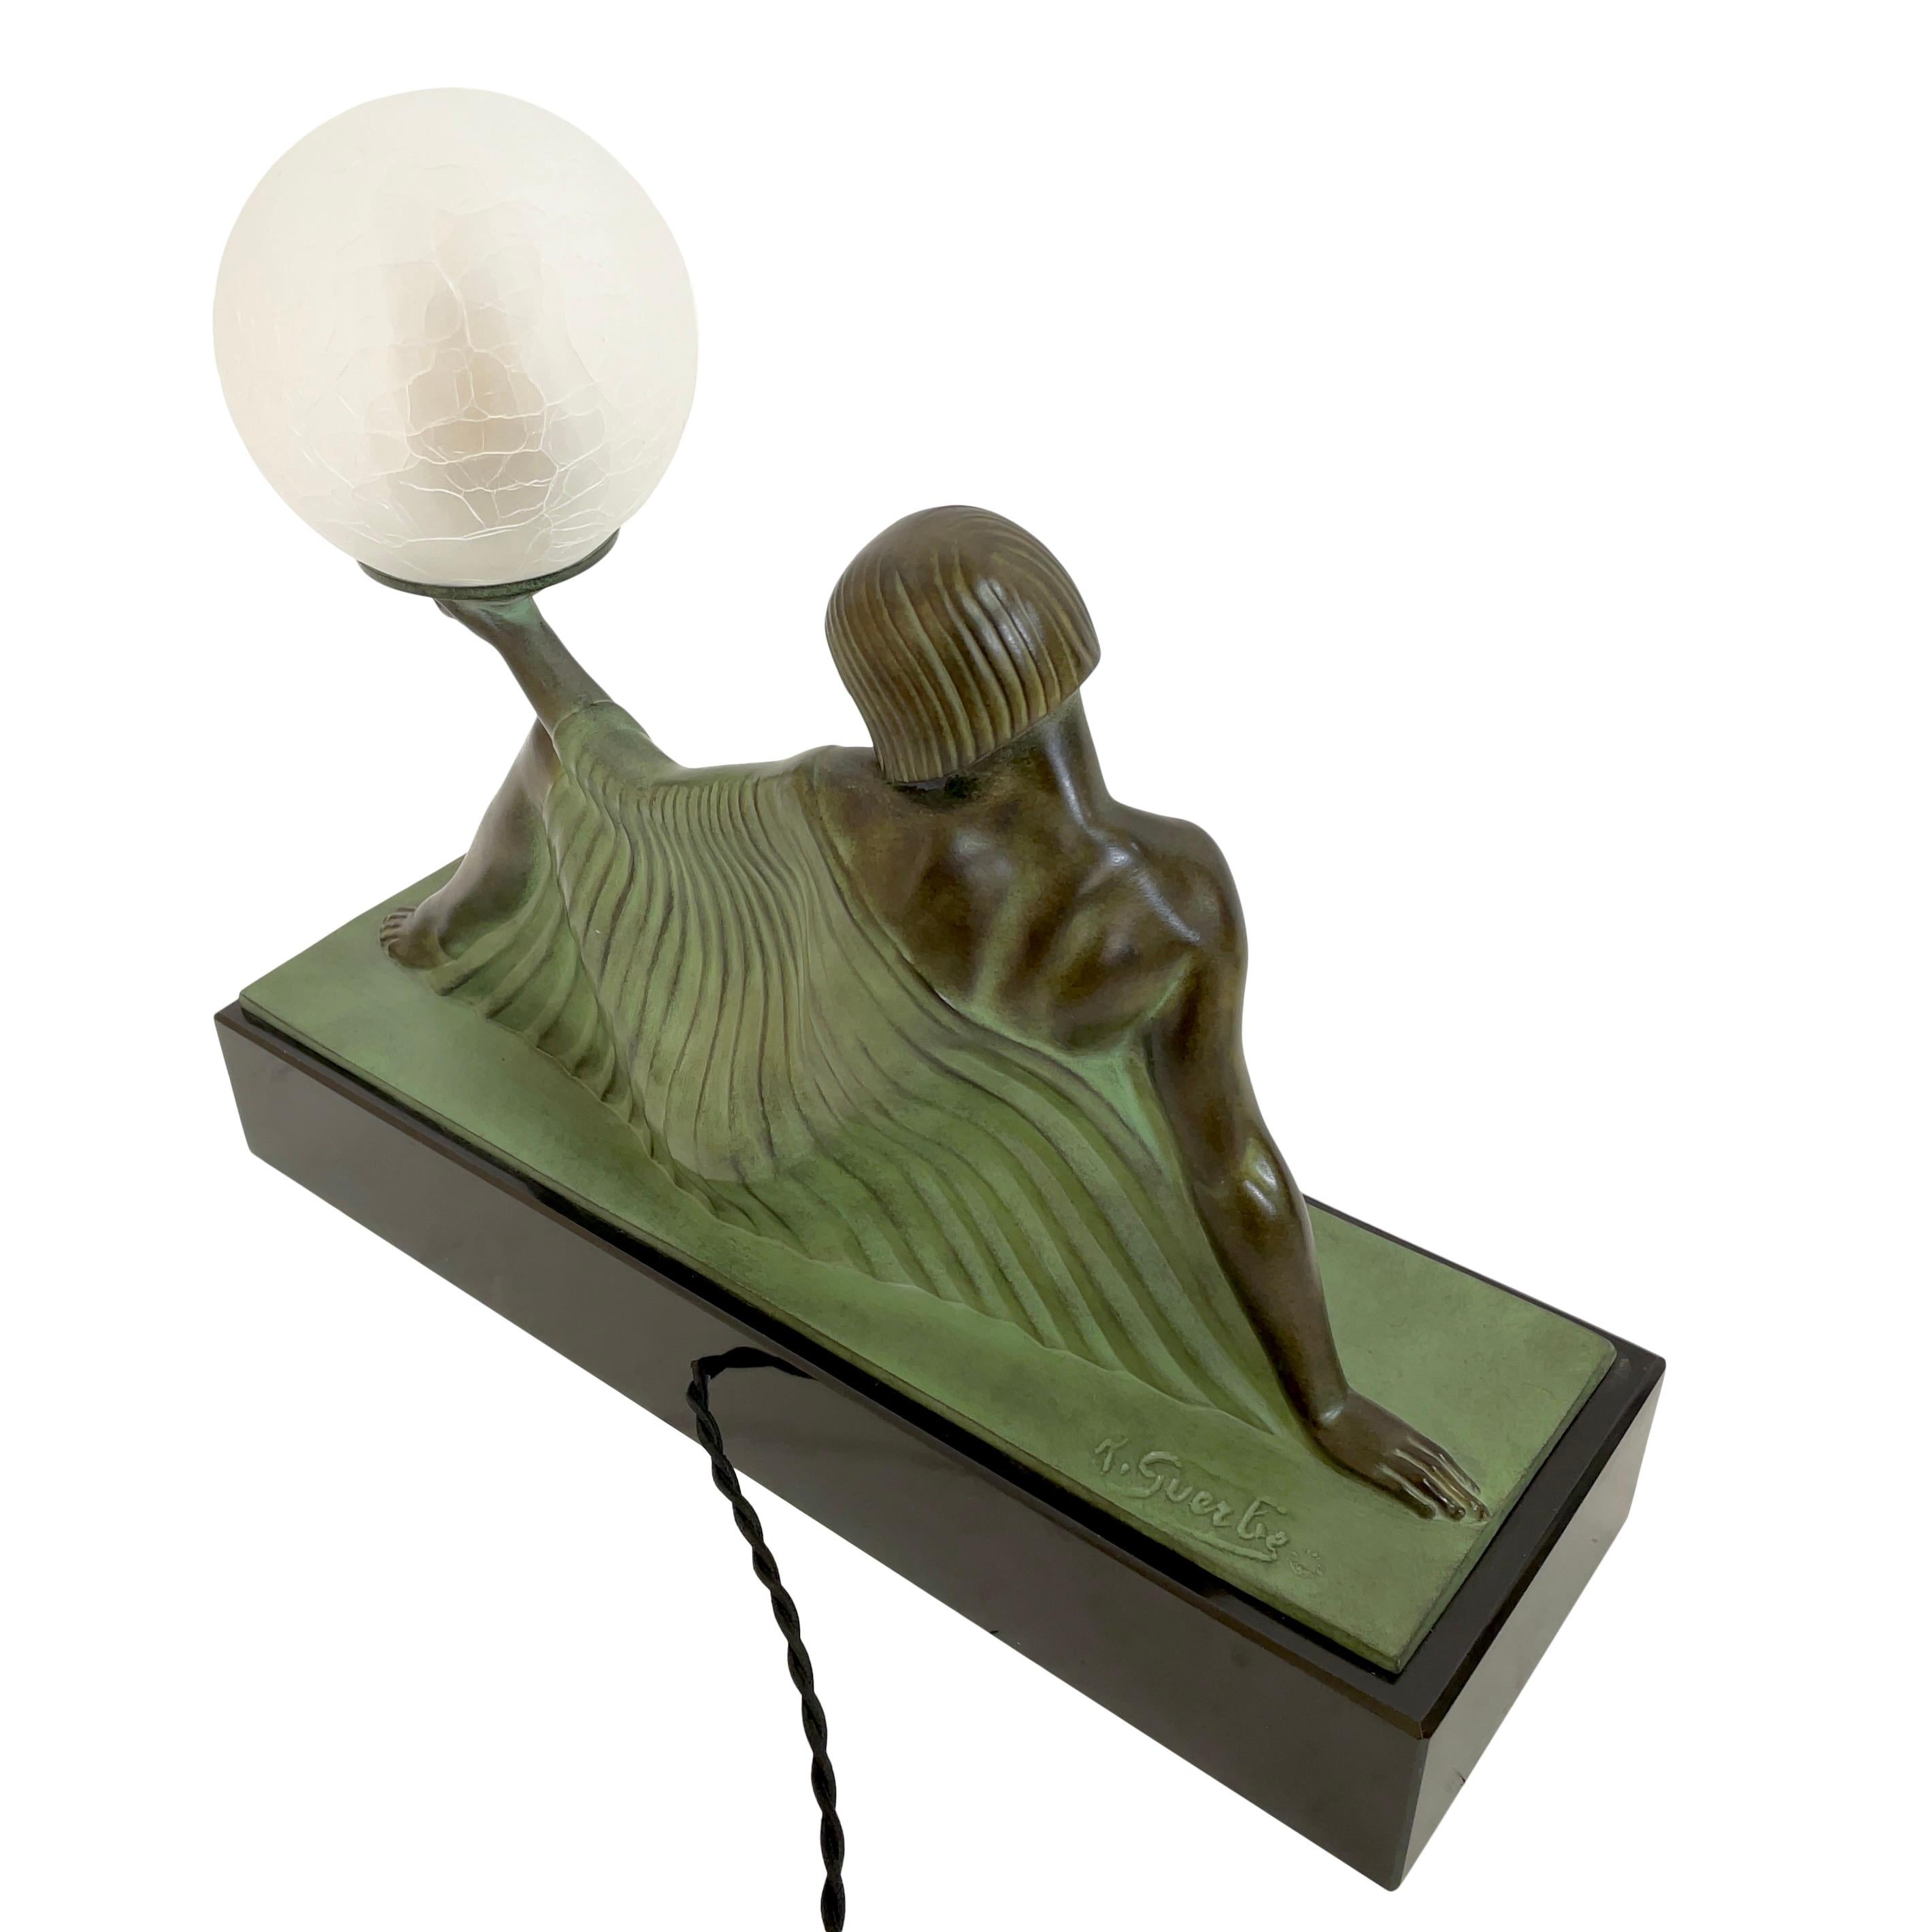 Reverie Sculpture Lamp in Art Deco Style by Raymonde Guerbe for Max Le Verrier 1